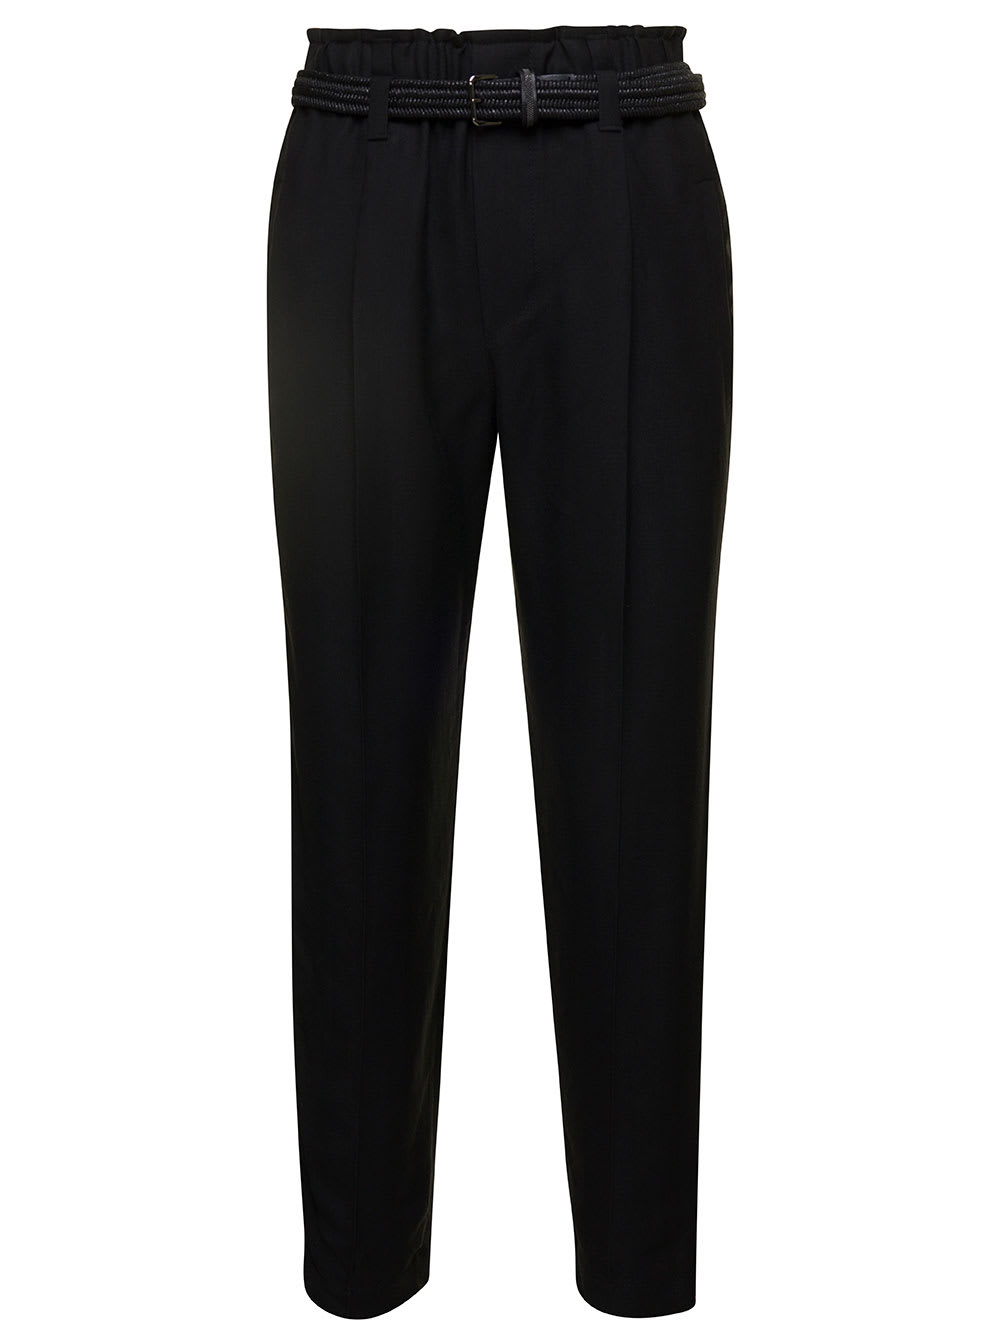 Black Cropped Pull-up Pants With Belt In Rayon Blend Woman